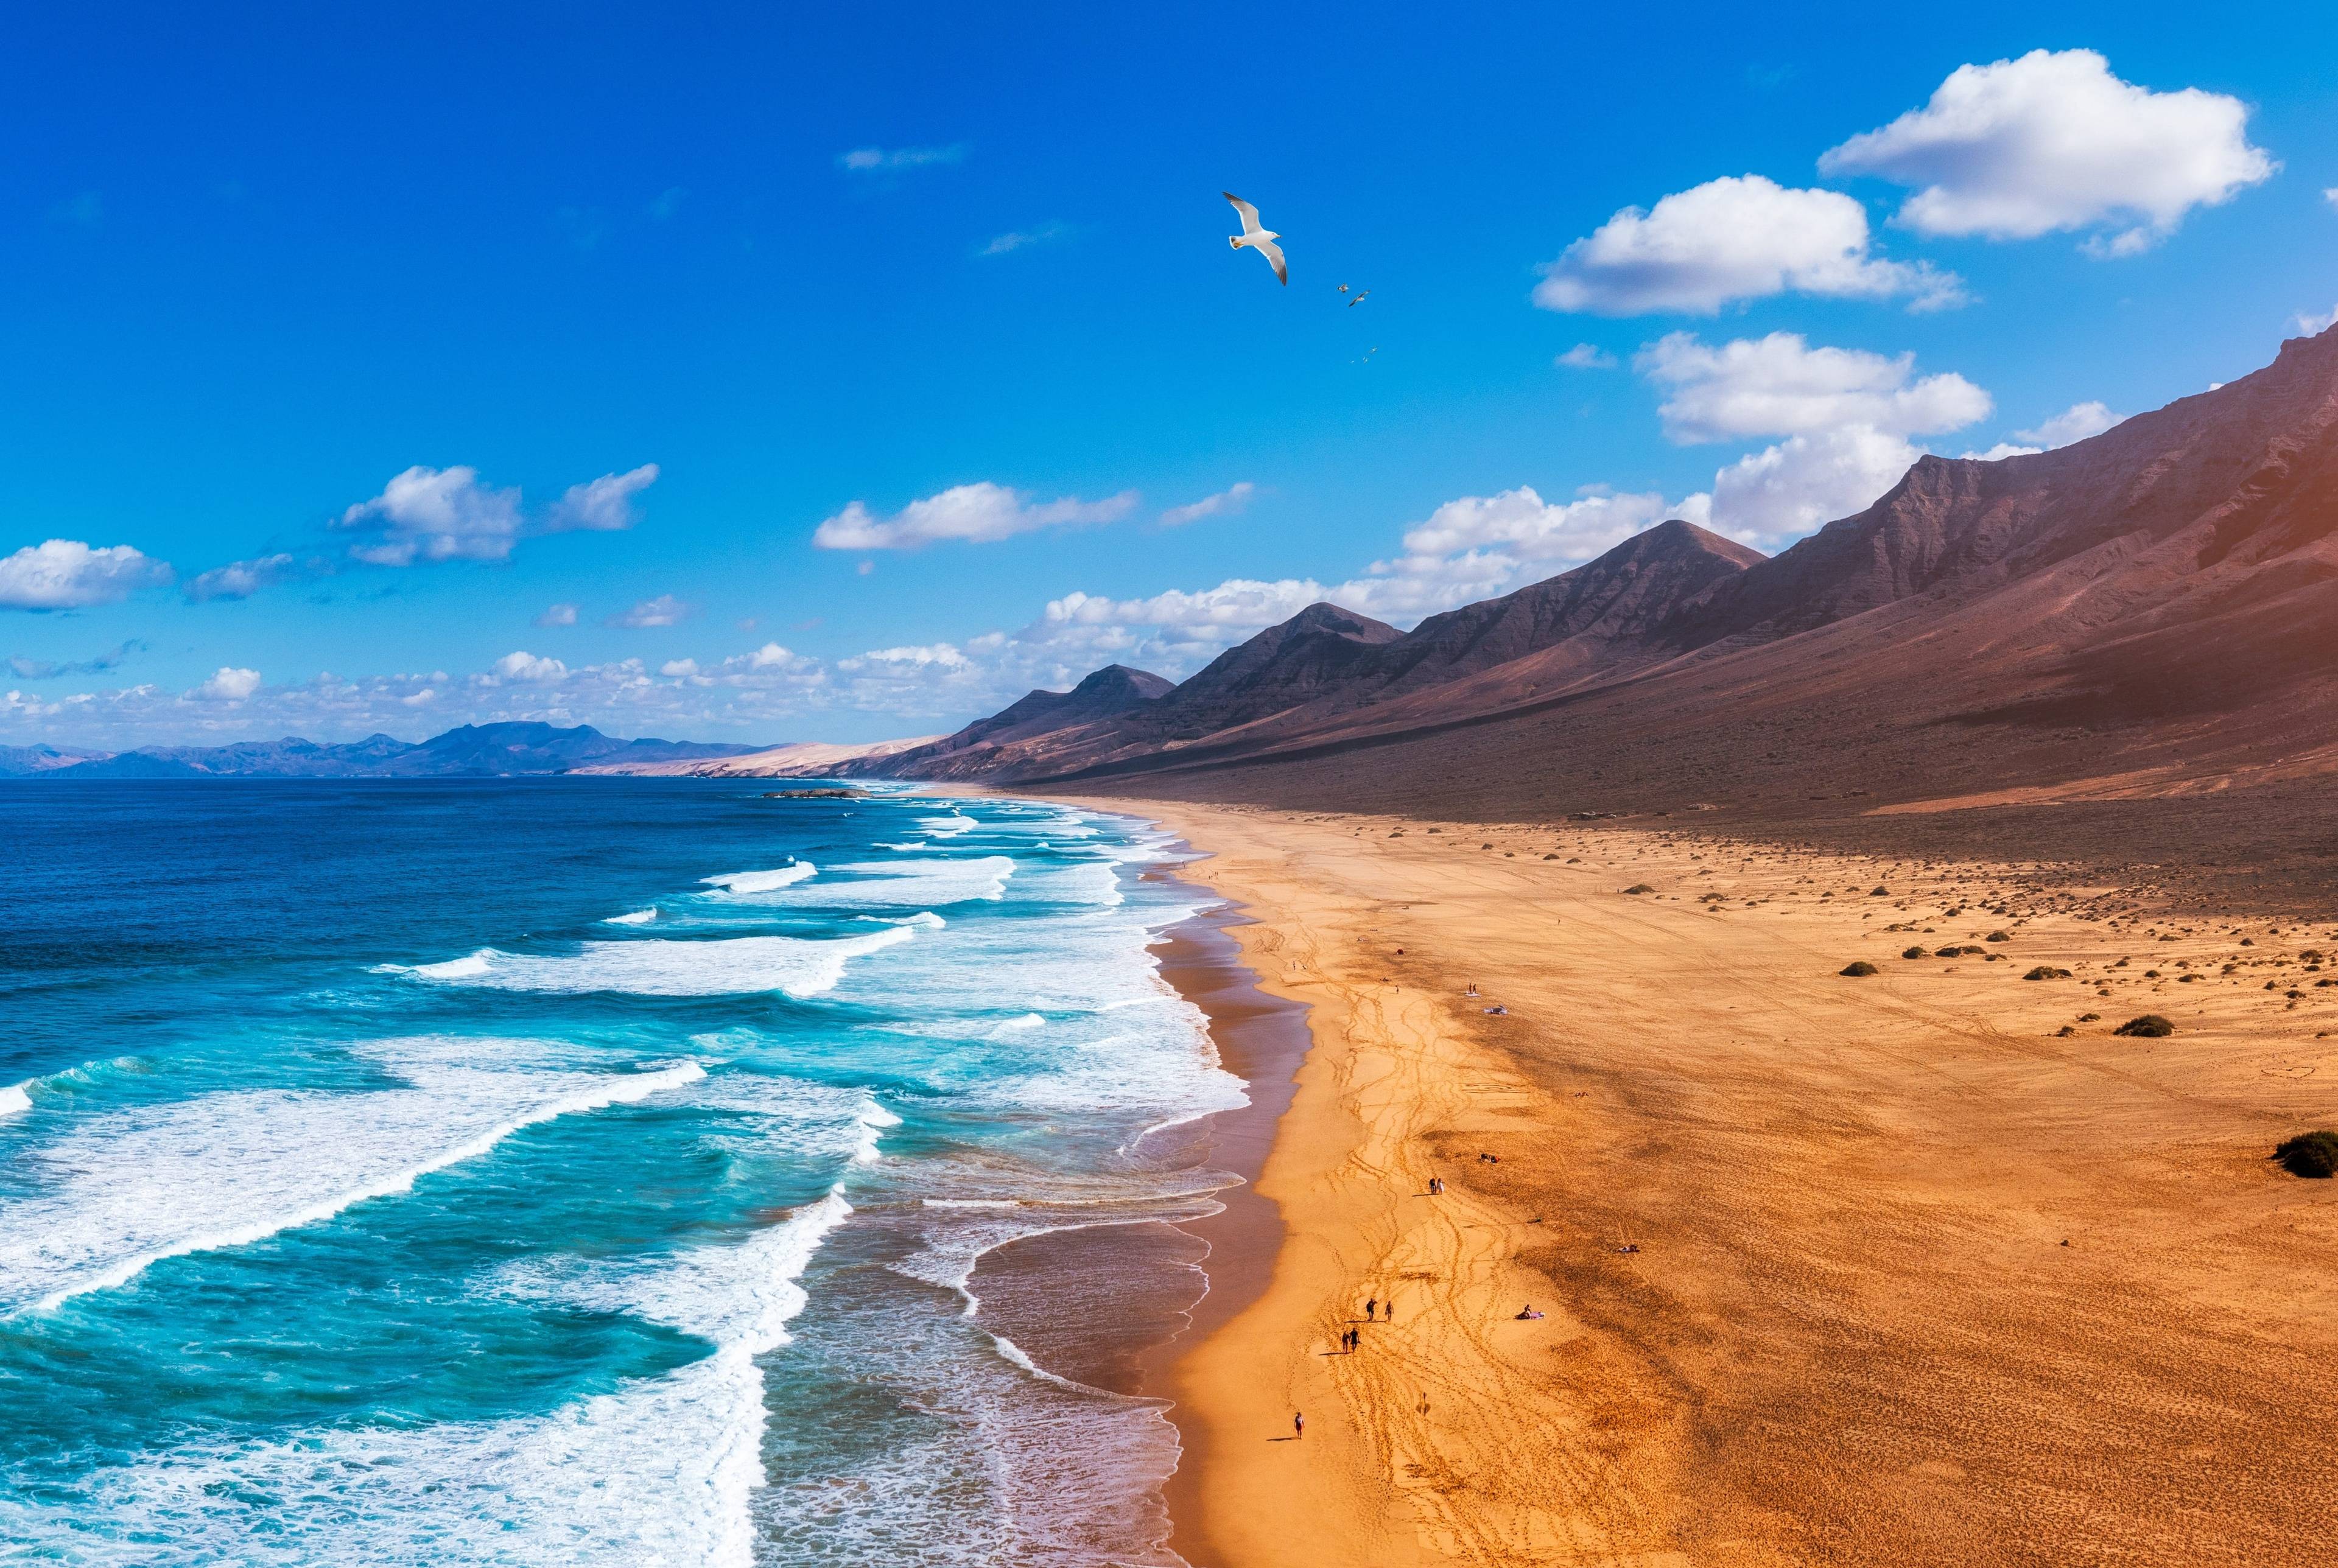 Volcanoes and Dunes: The Changing Landscape of North Fuerteventura